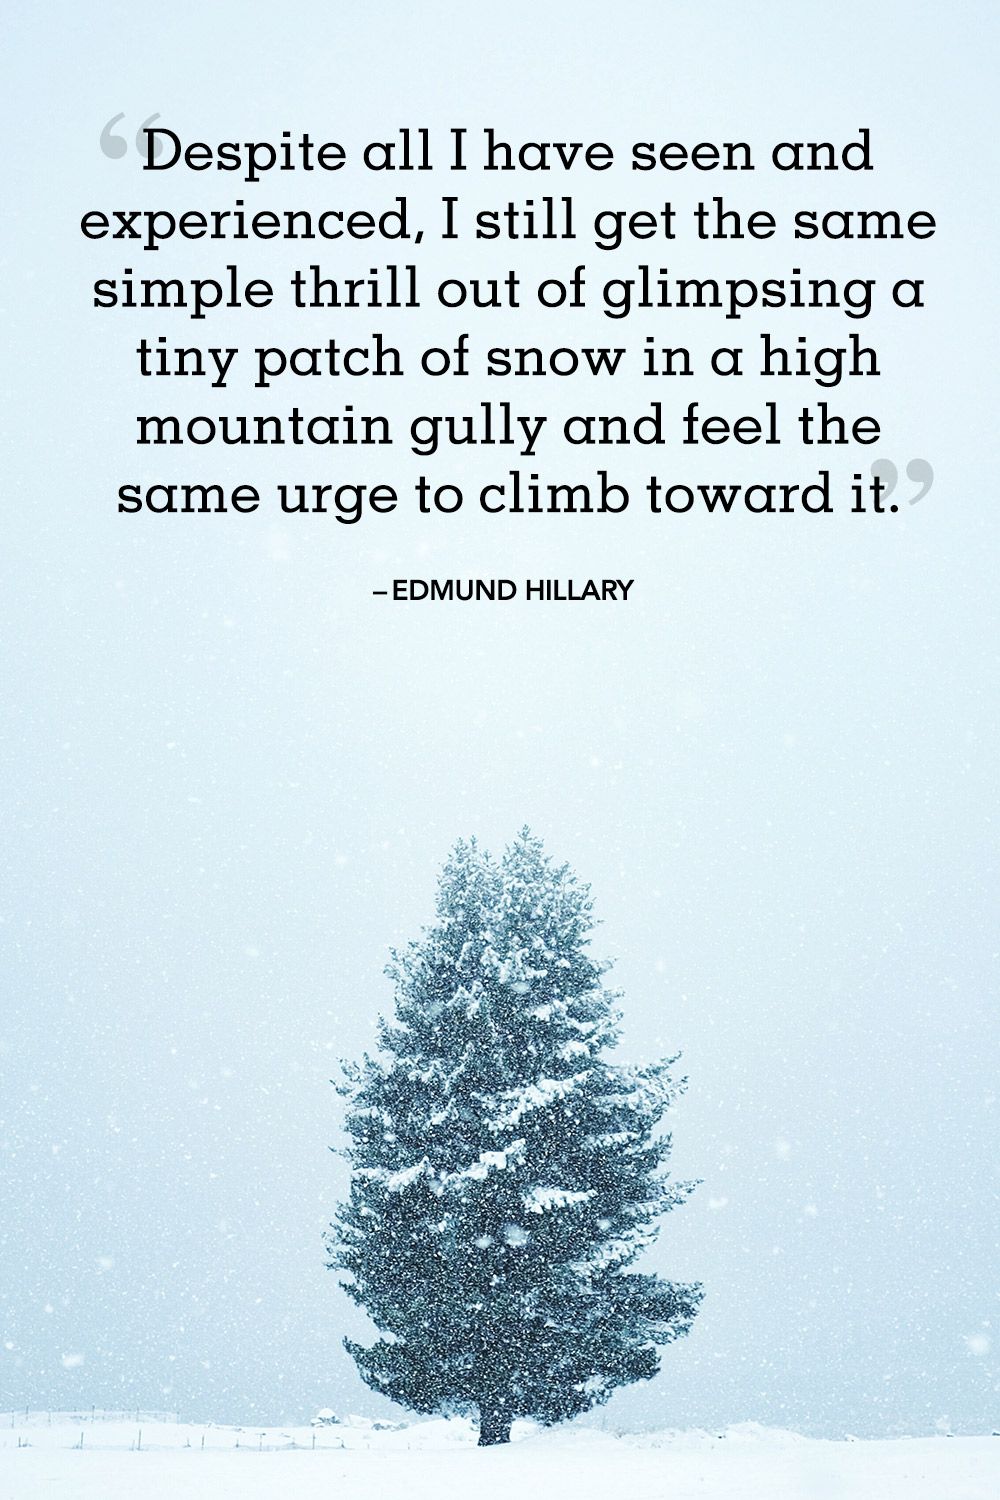 quotes about winter